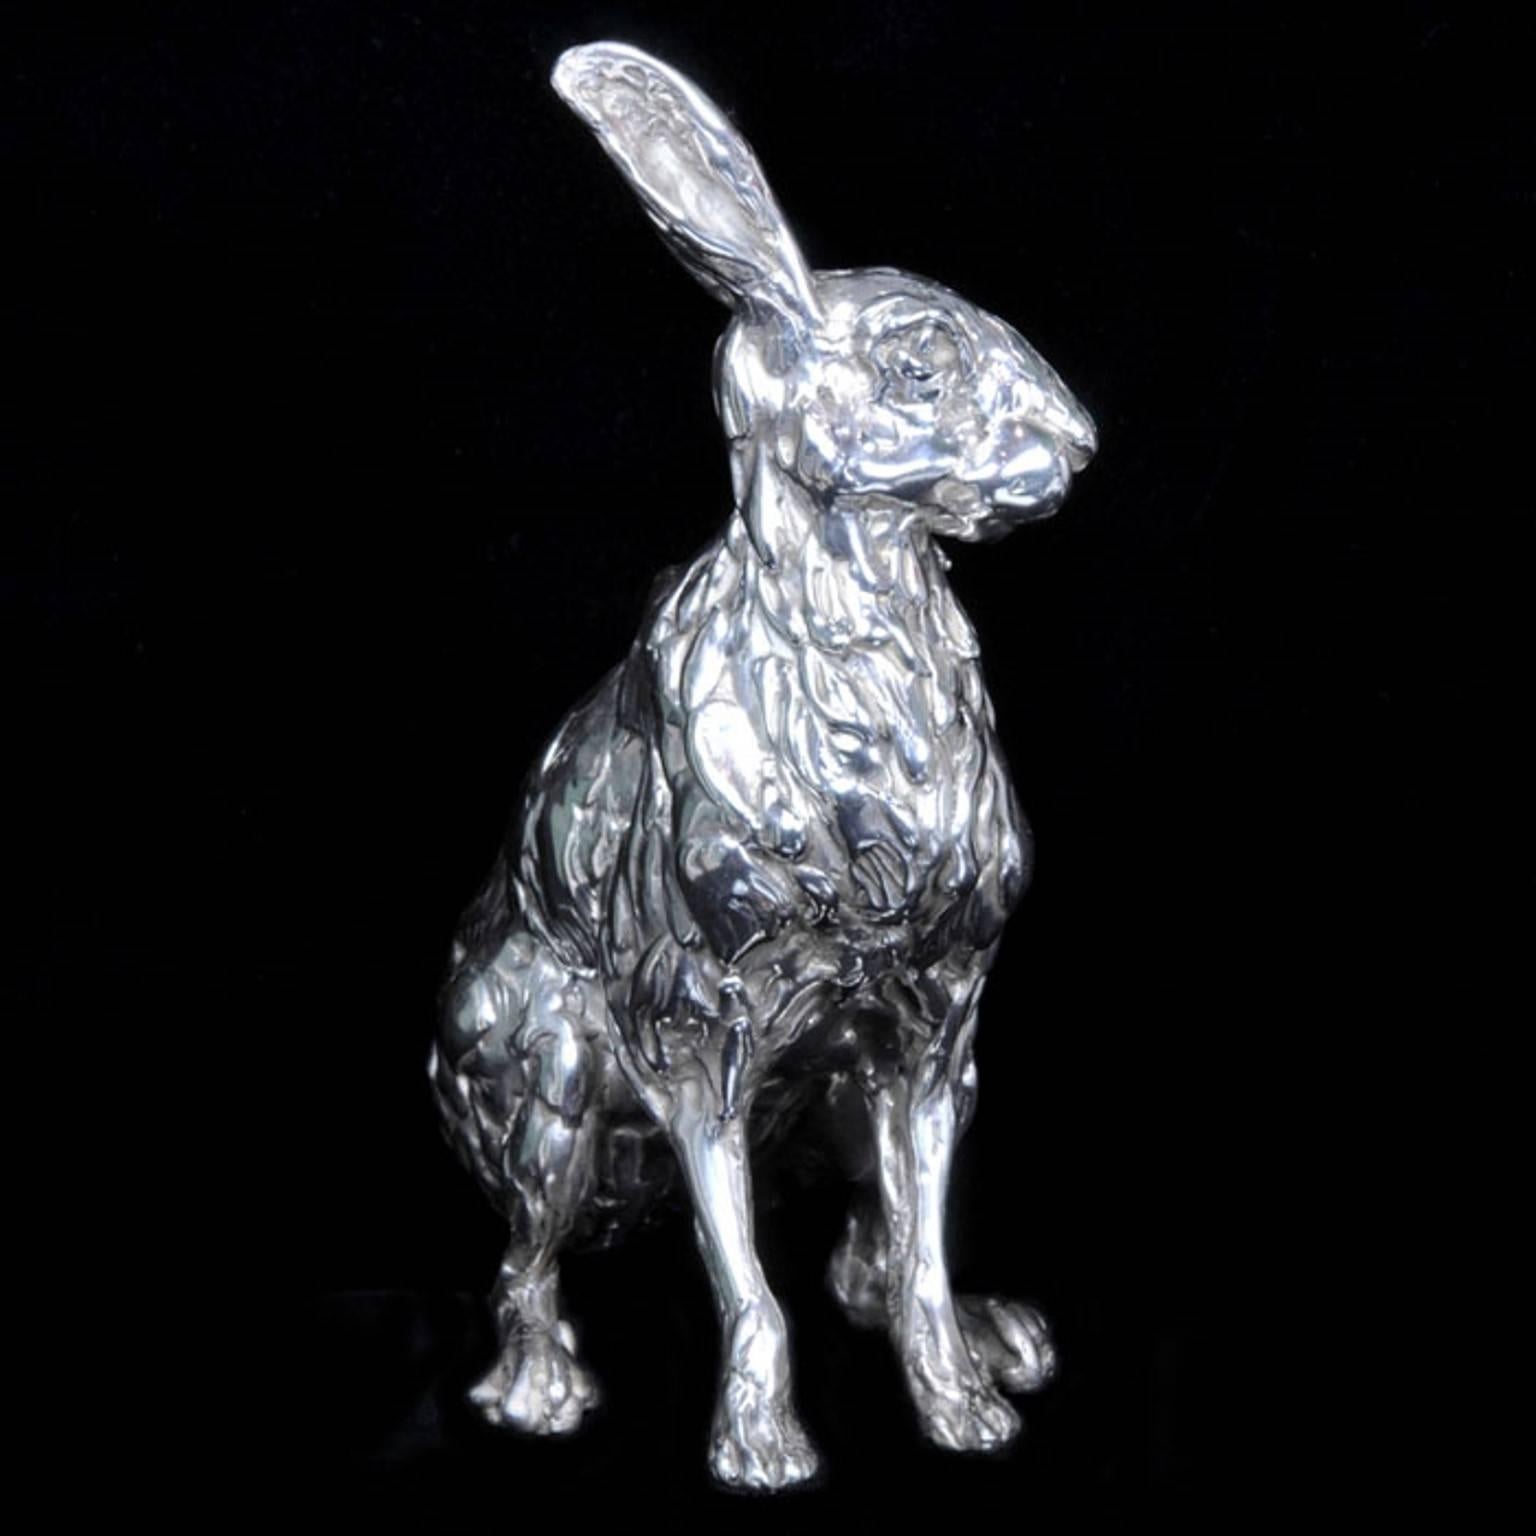 Lucy Kinsella 'Seated Hare' sterling silver sculpture  1